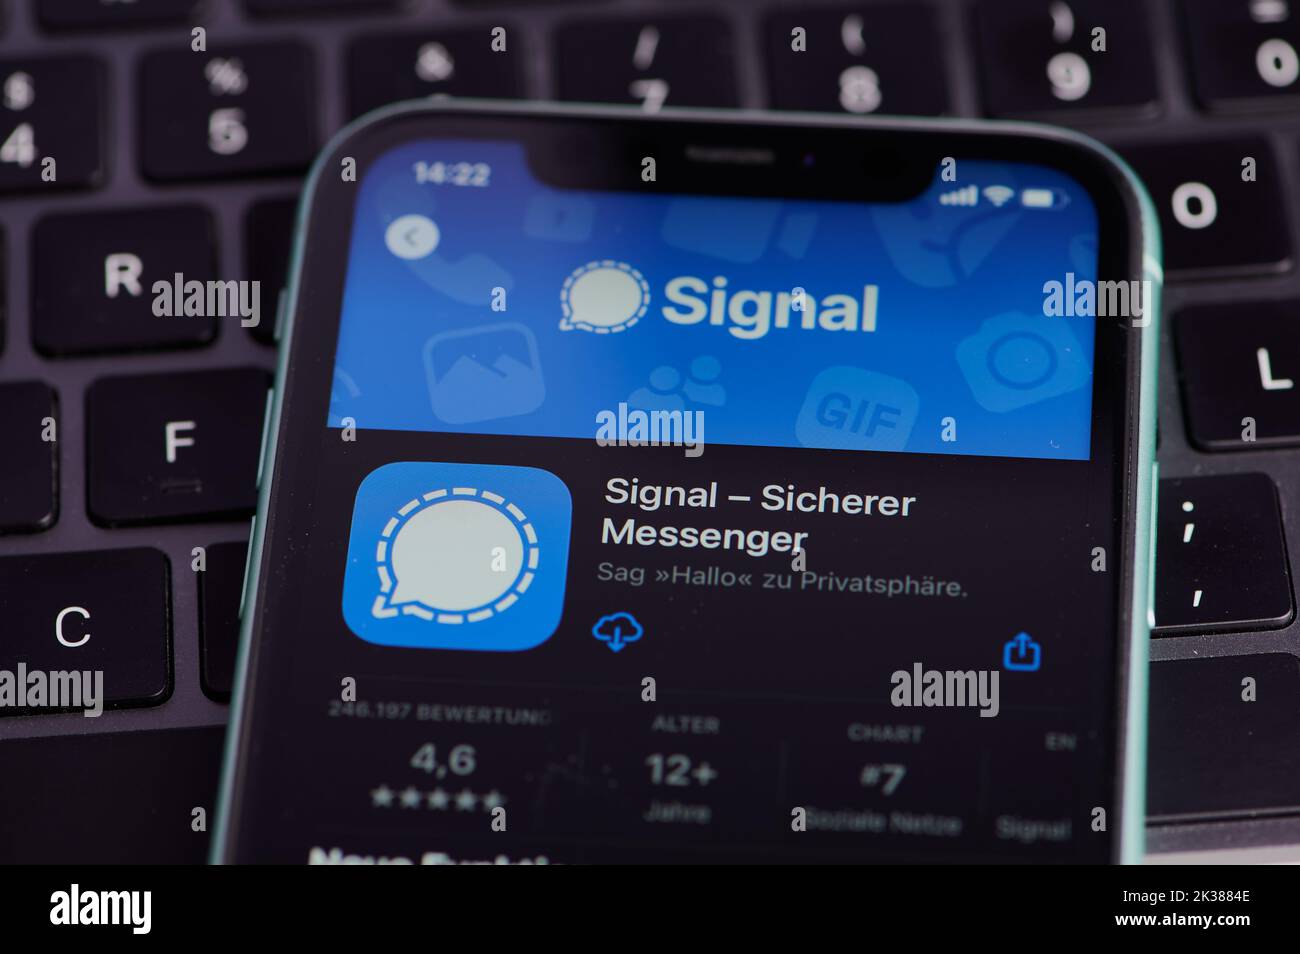 app icon of the signal messenger on smartphone screen Stock Photo